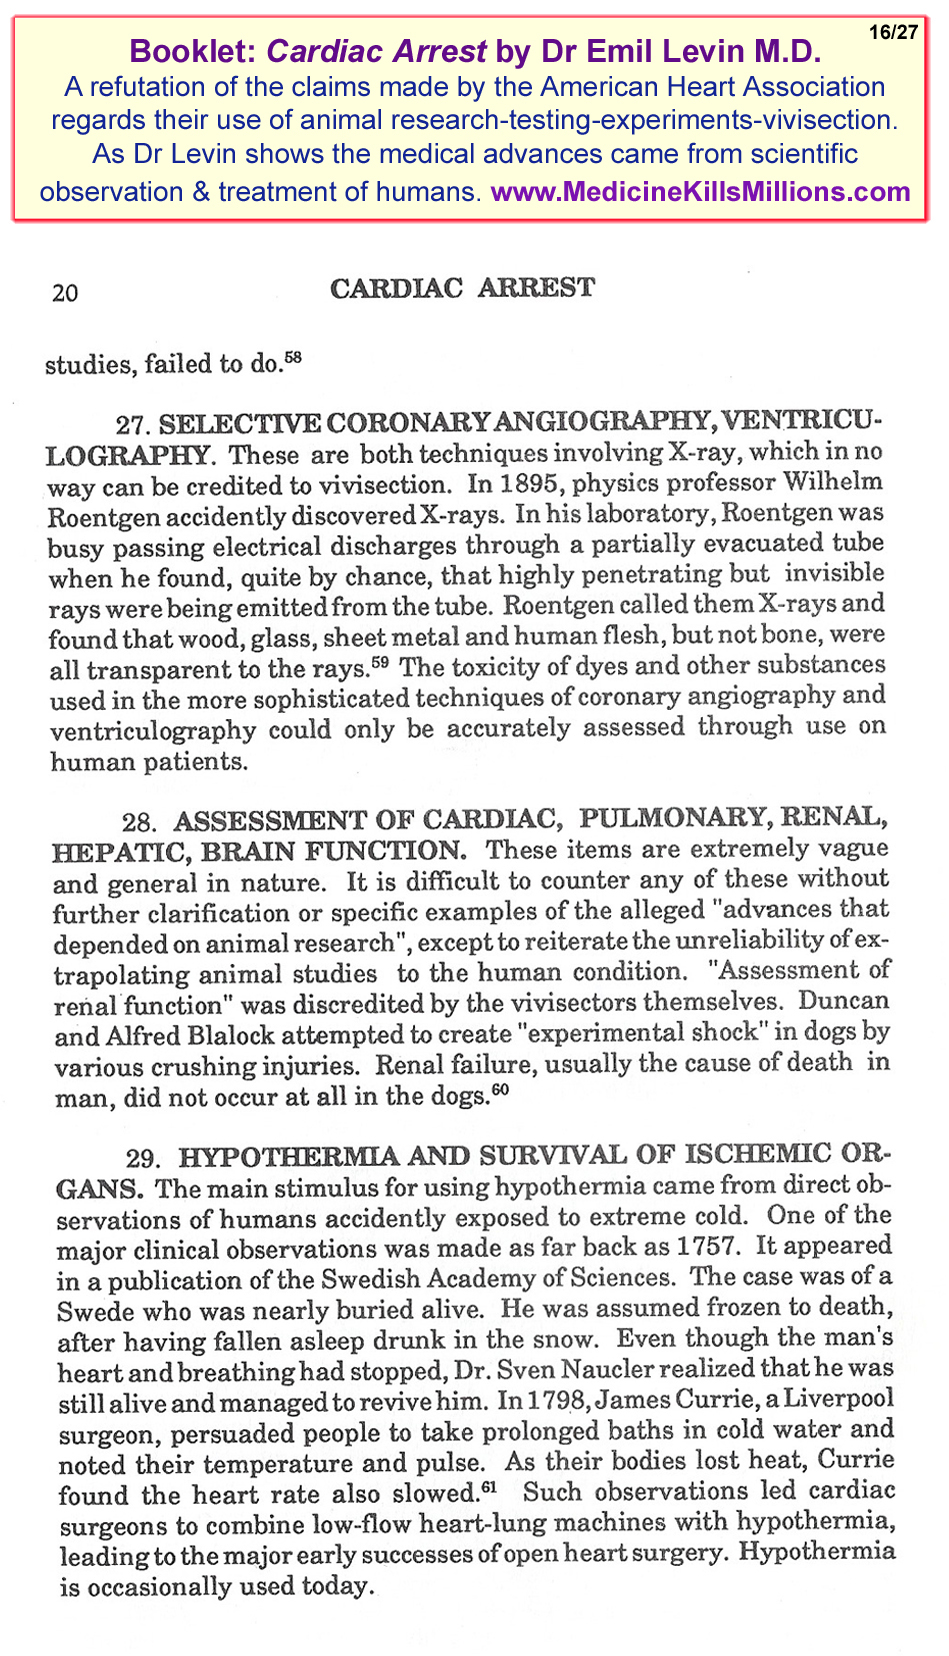 Cardiac-Arrest-16-Refutation-of-Claims-by-American-Heart-Association-About-Animal-Research-Testing-Experiments.jpg